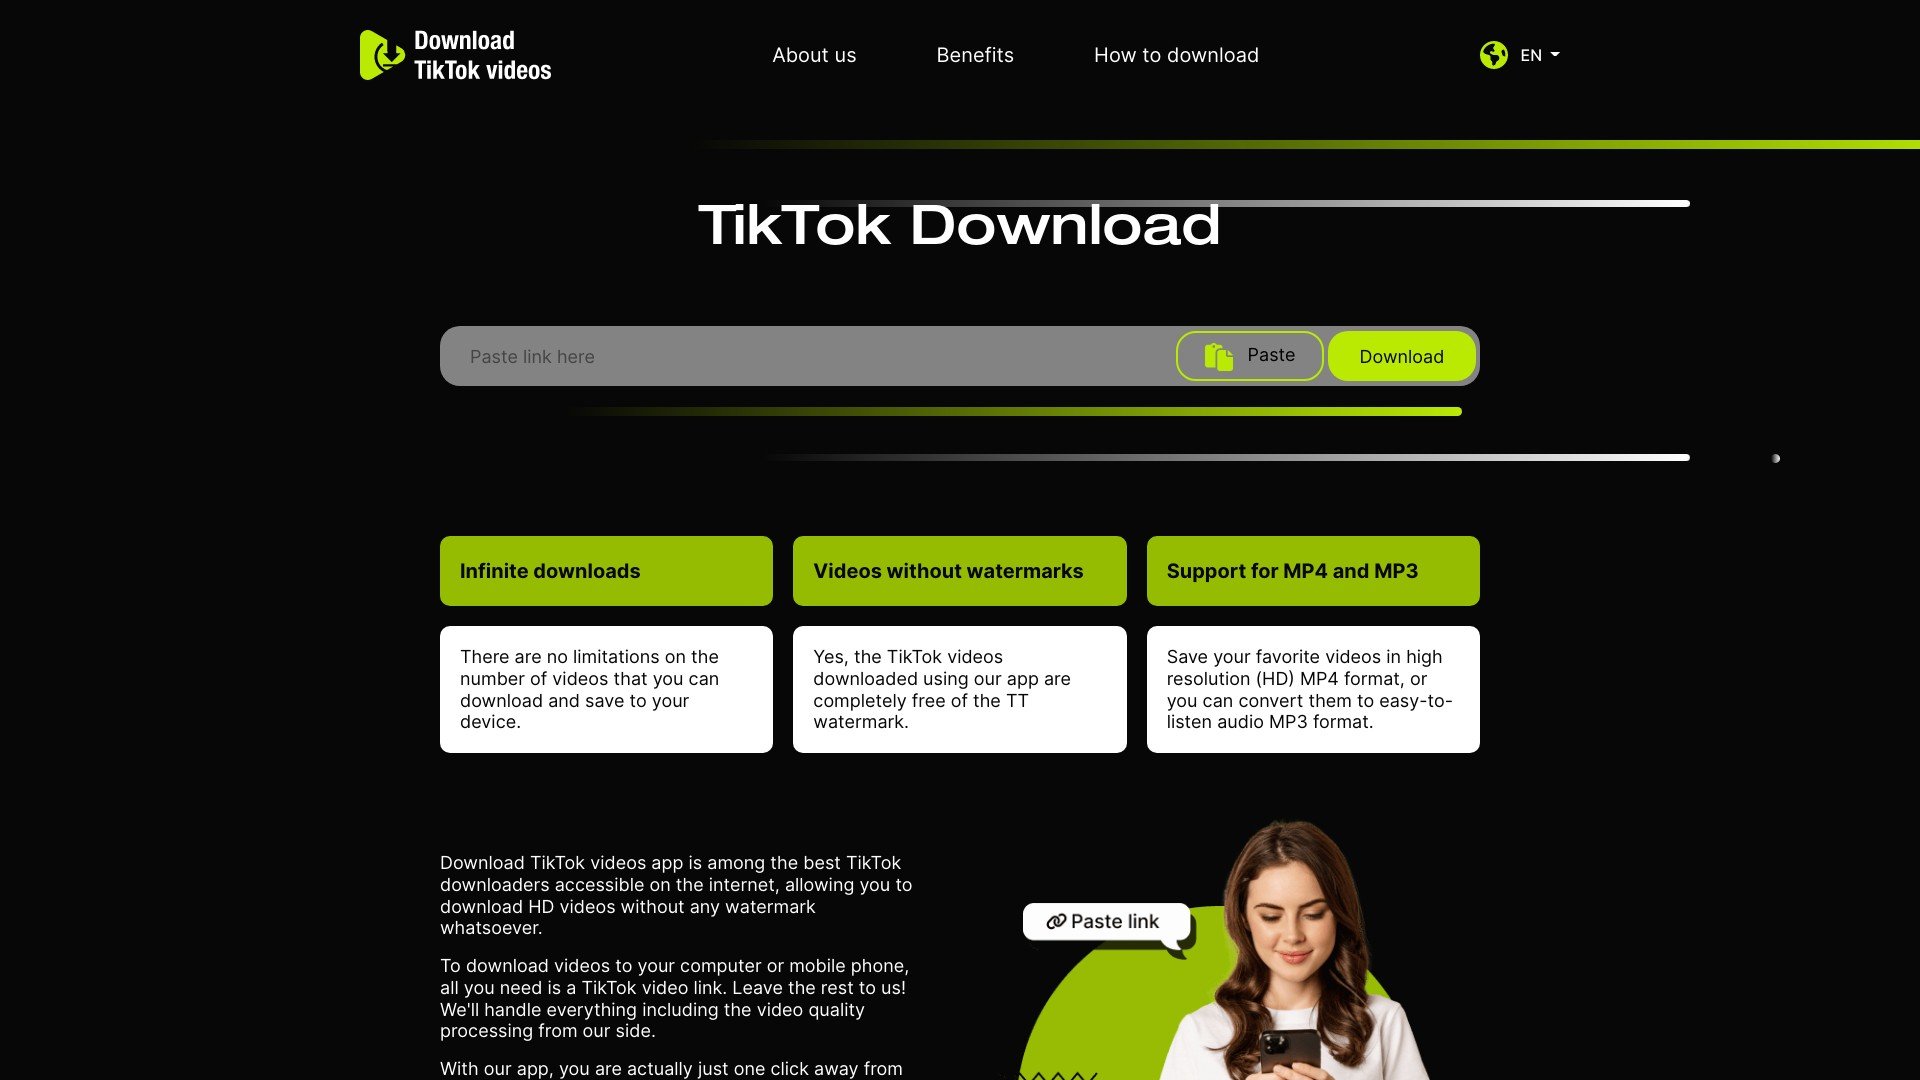 TikTok: Is DownloadTTVideo.com Safe? How to Download?